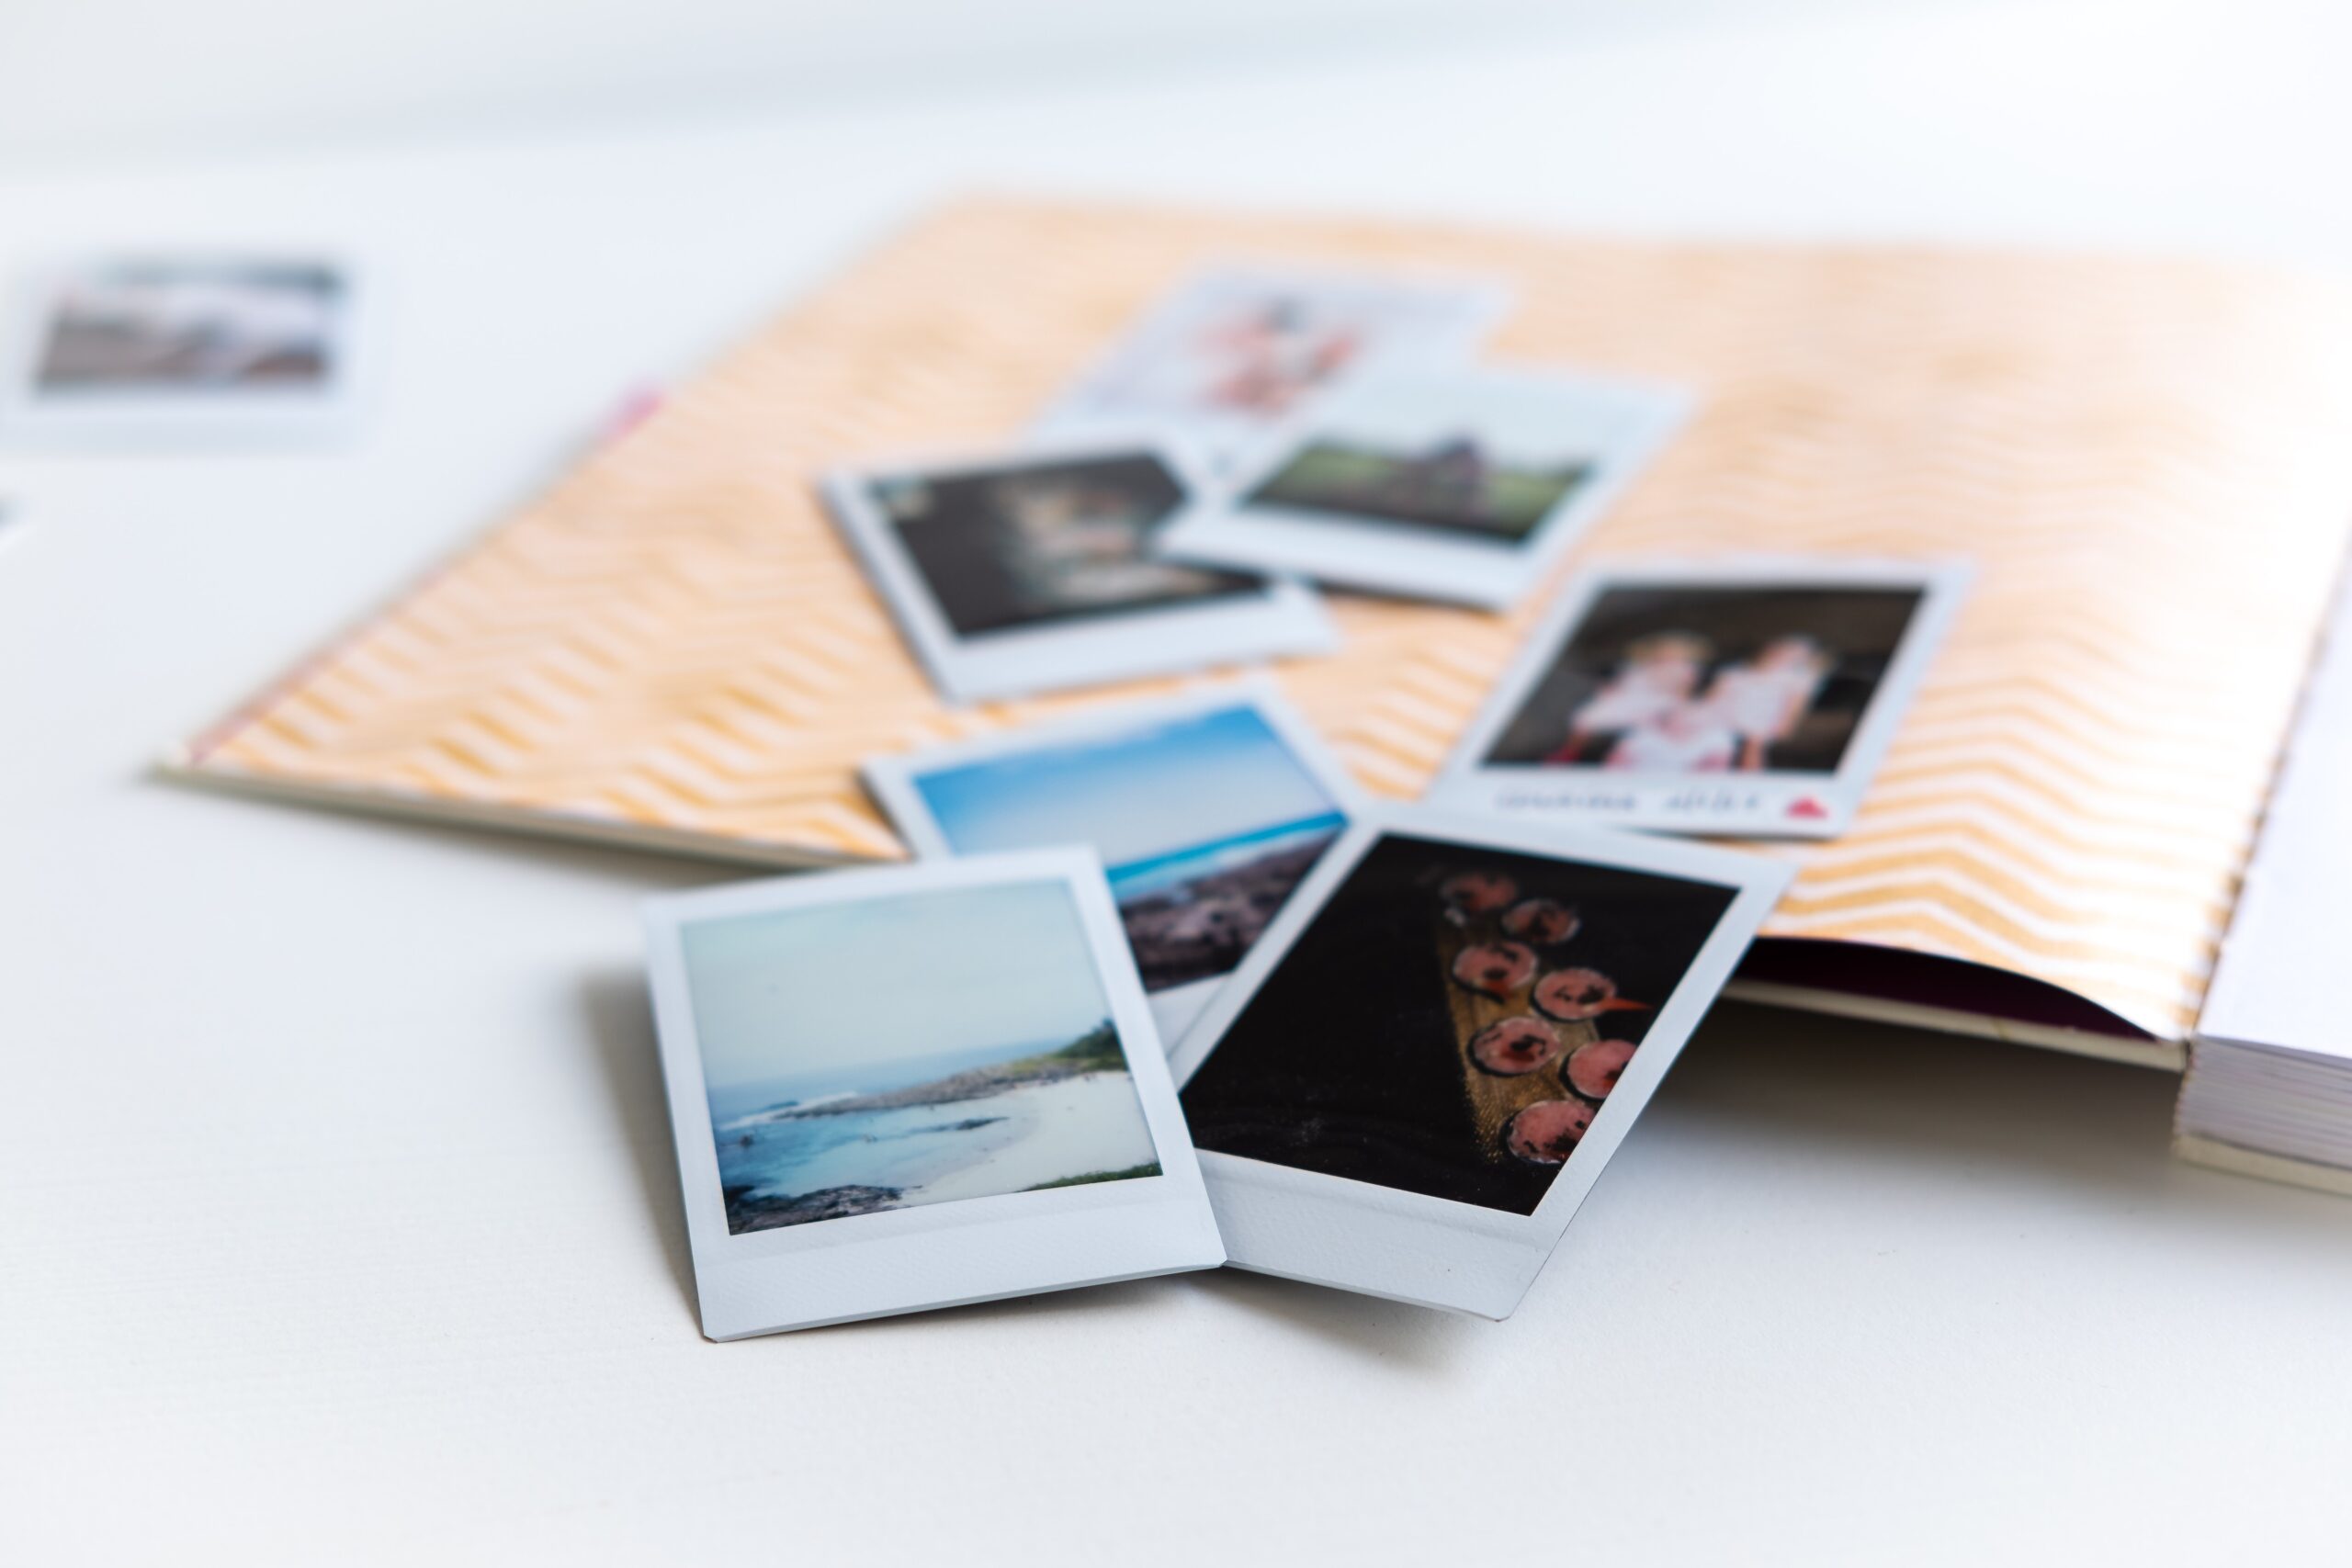 printed-photos-ready-to-be-added-to-scrapbook